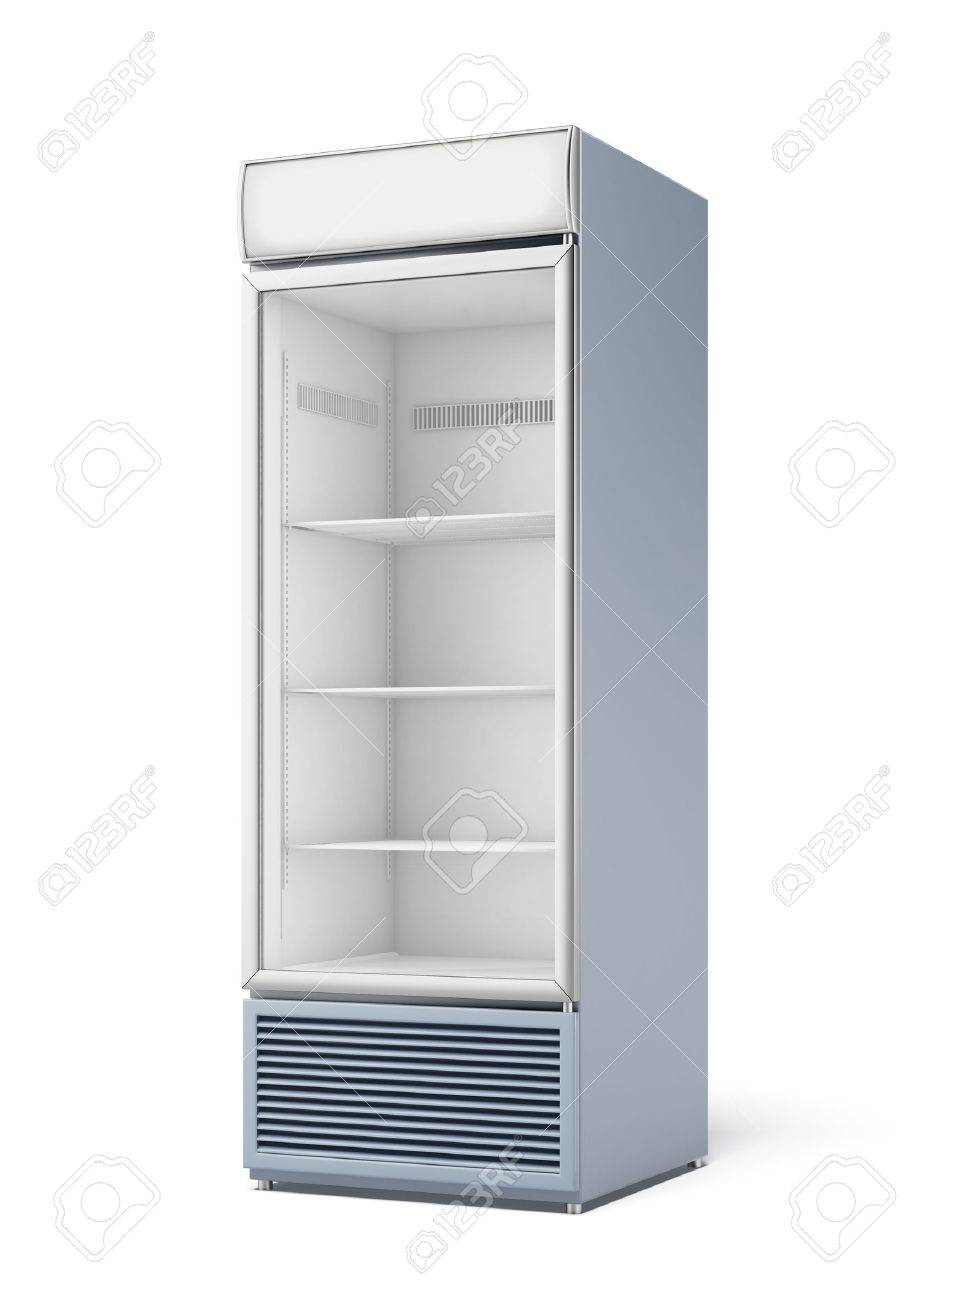 Drink Display Fridge Isolated On A White Background 3d Render